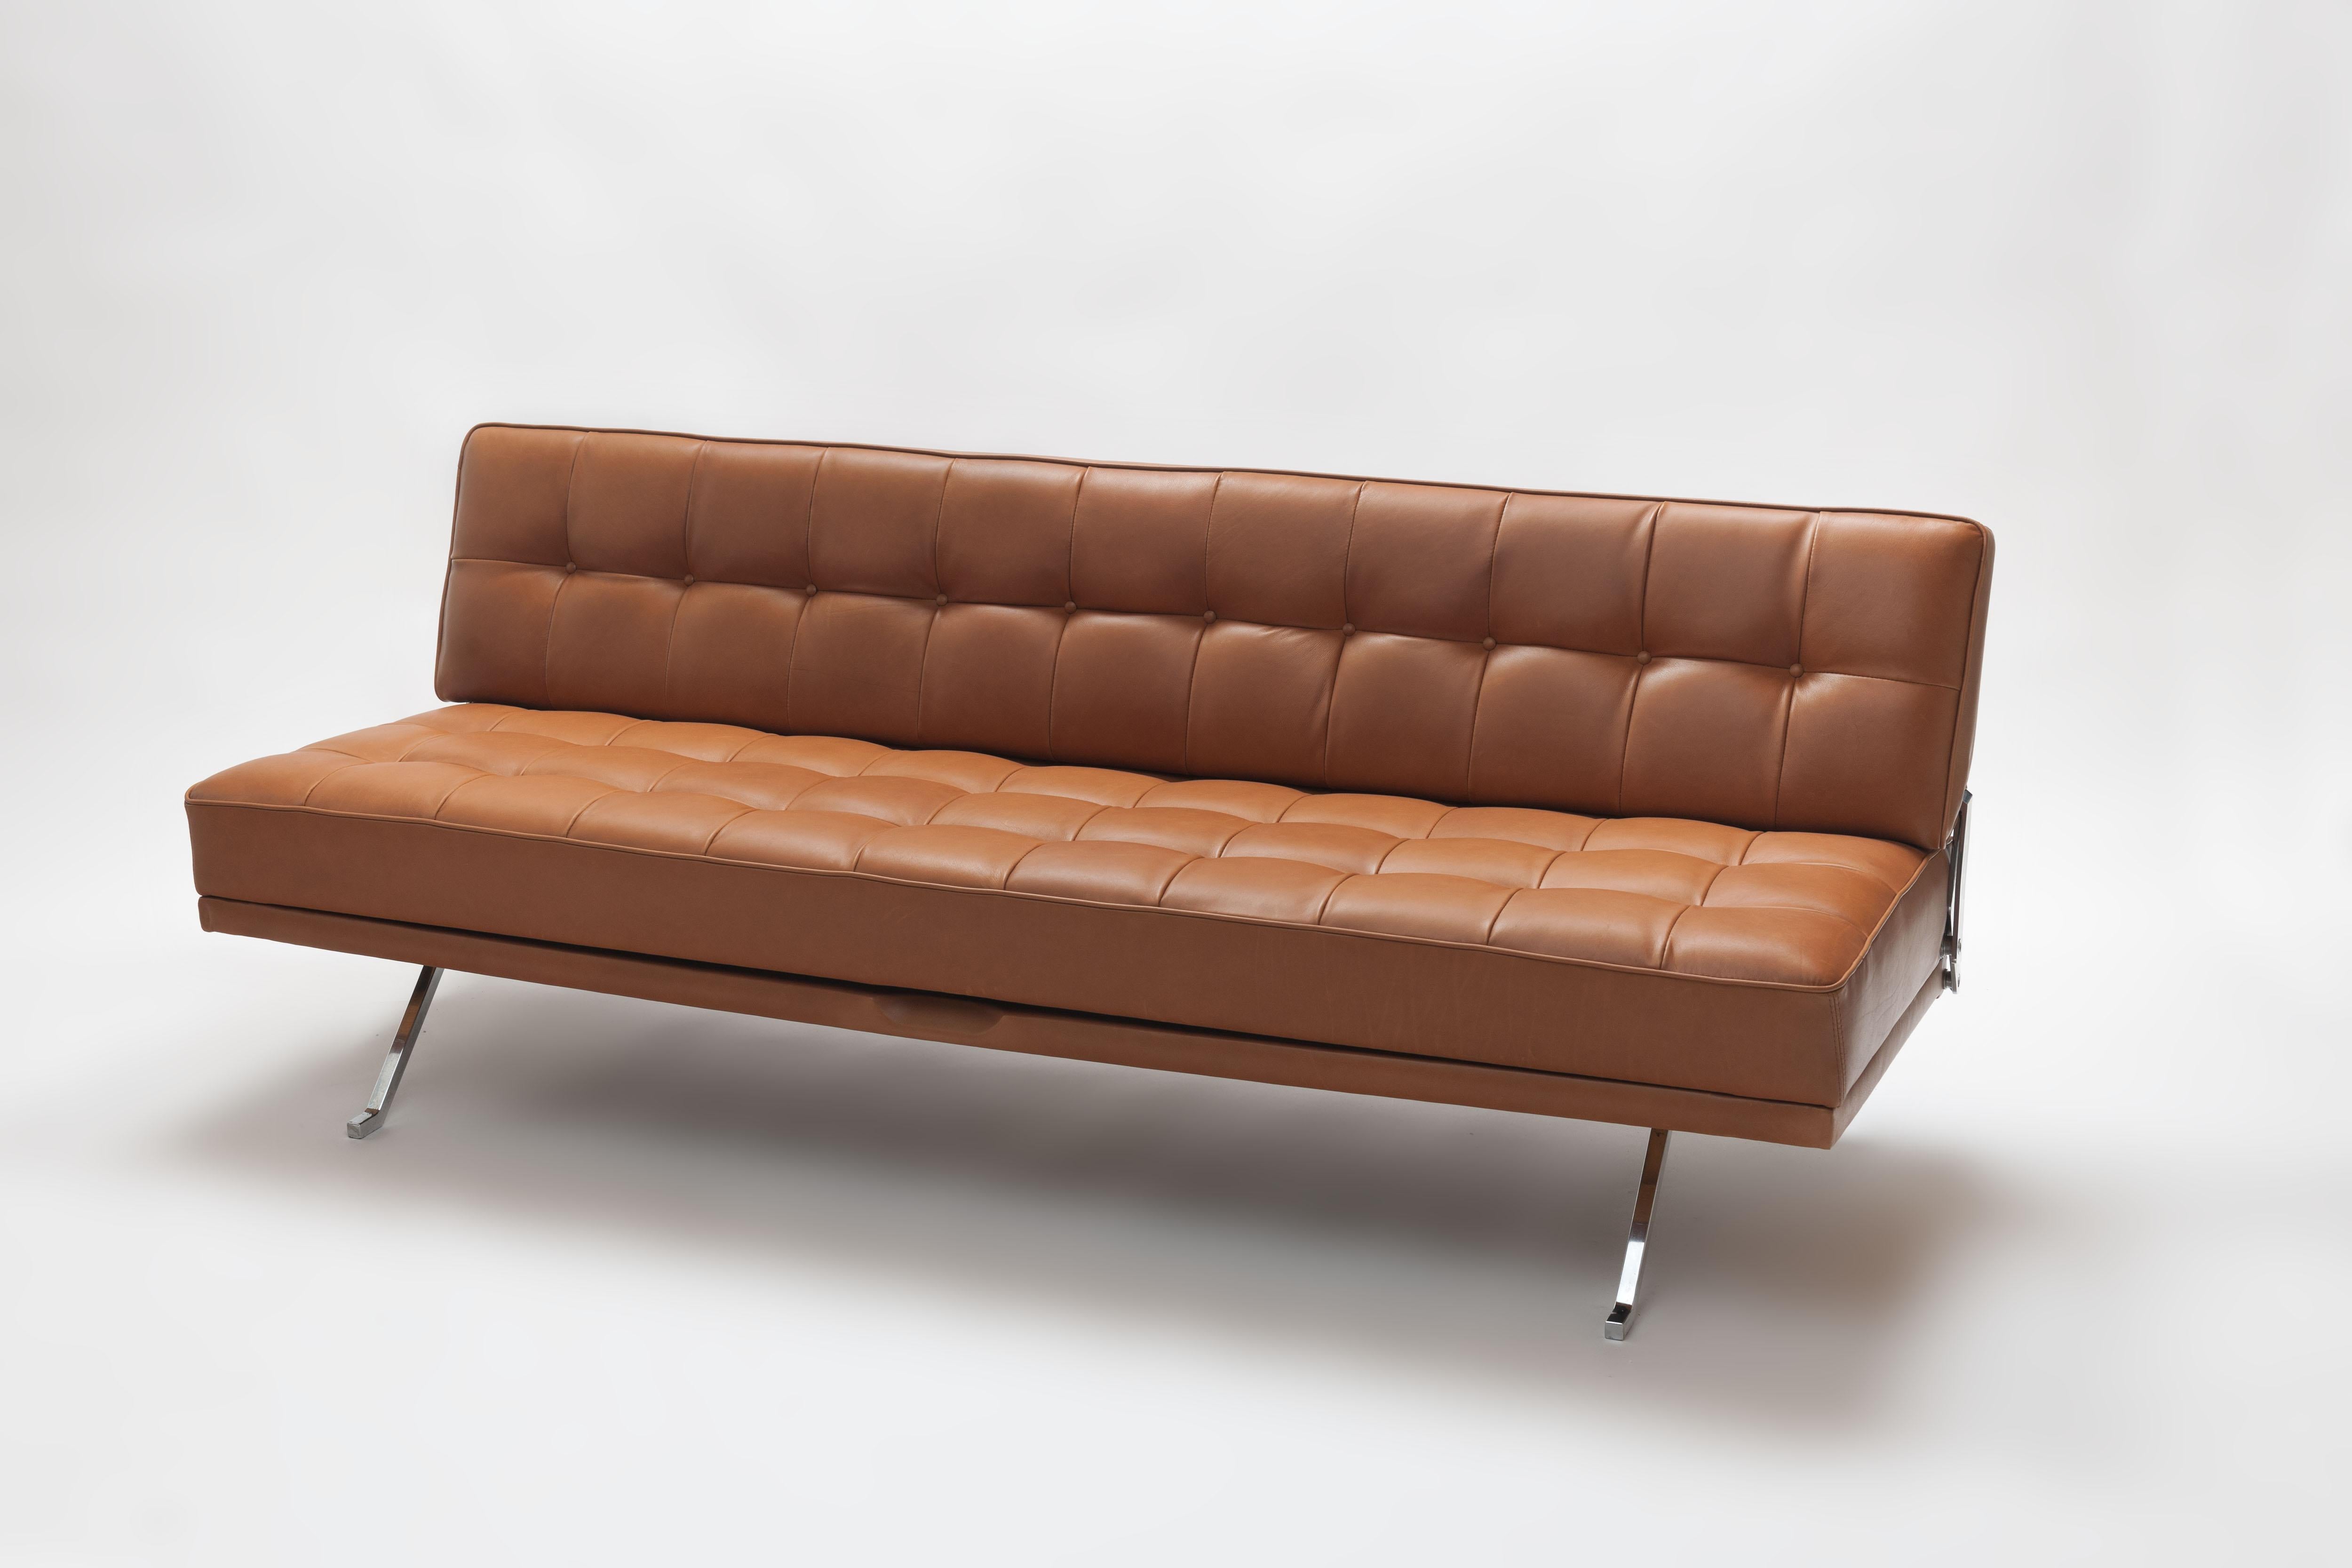 Constanze sofa daybed by Austrian architect and designer Johannes Spalt is a smart and iconic design from the 1960s. By one hand movement the sofa turns into a very comfortable daybed. A ingenious, beautiful and high quality technique and